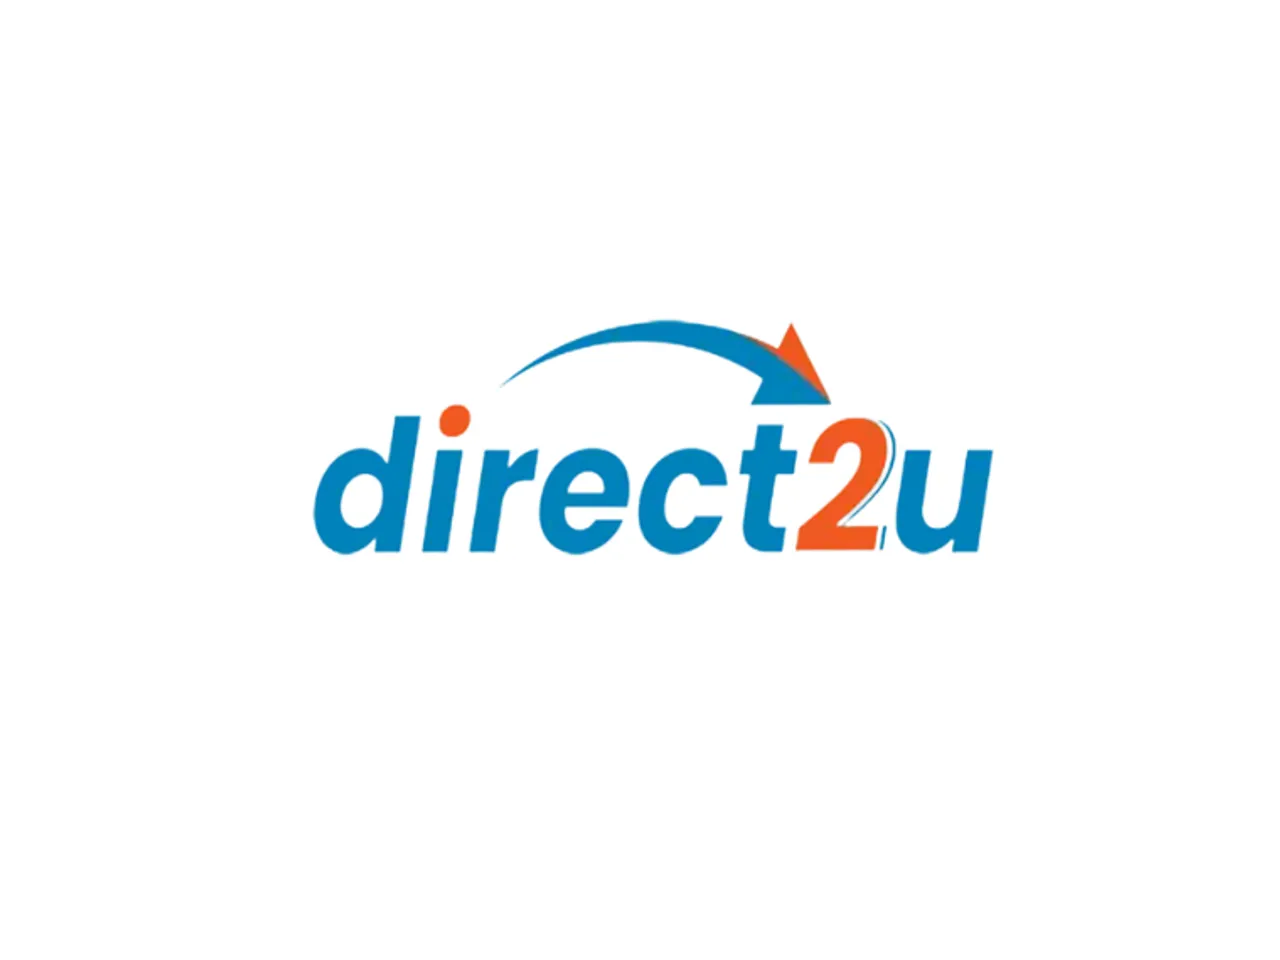 Direct2U raises ₹1.8 crore in seed round, led by Inflection Point Ventures